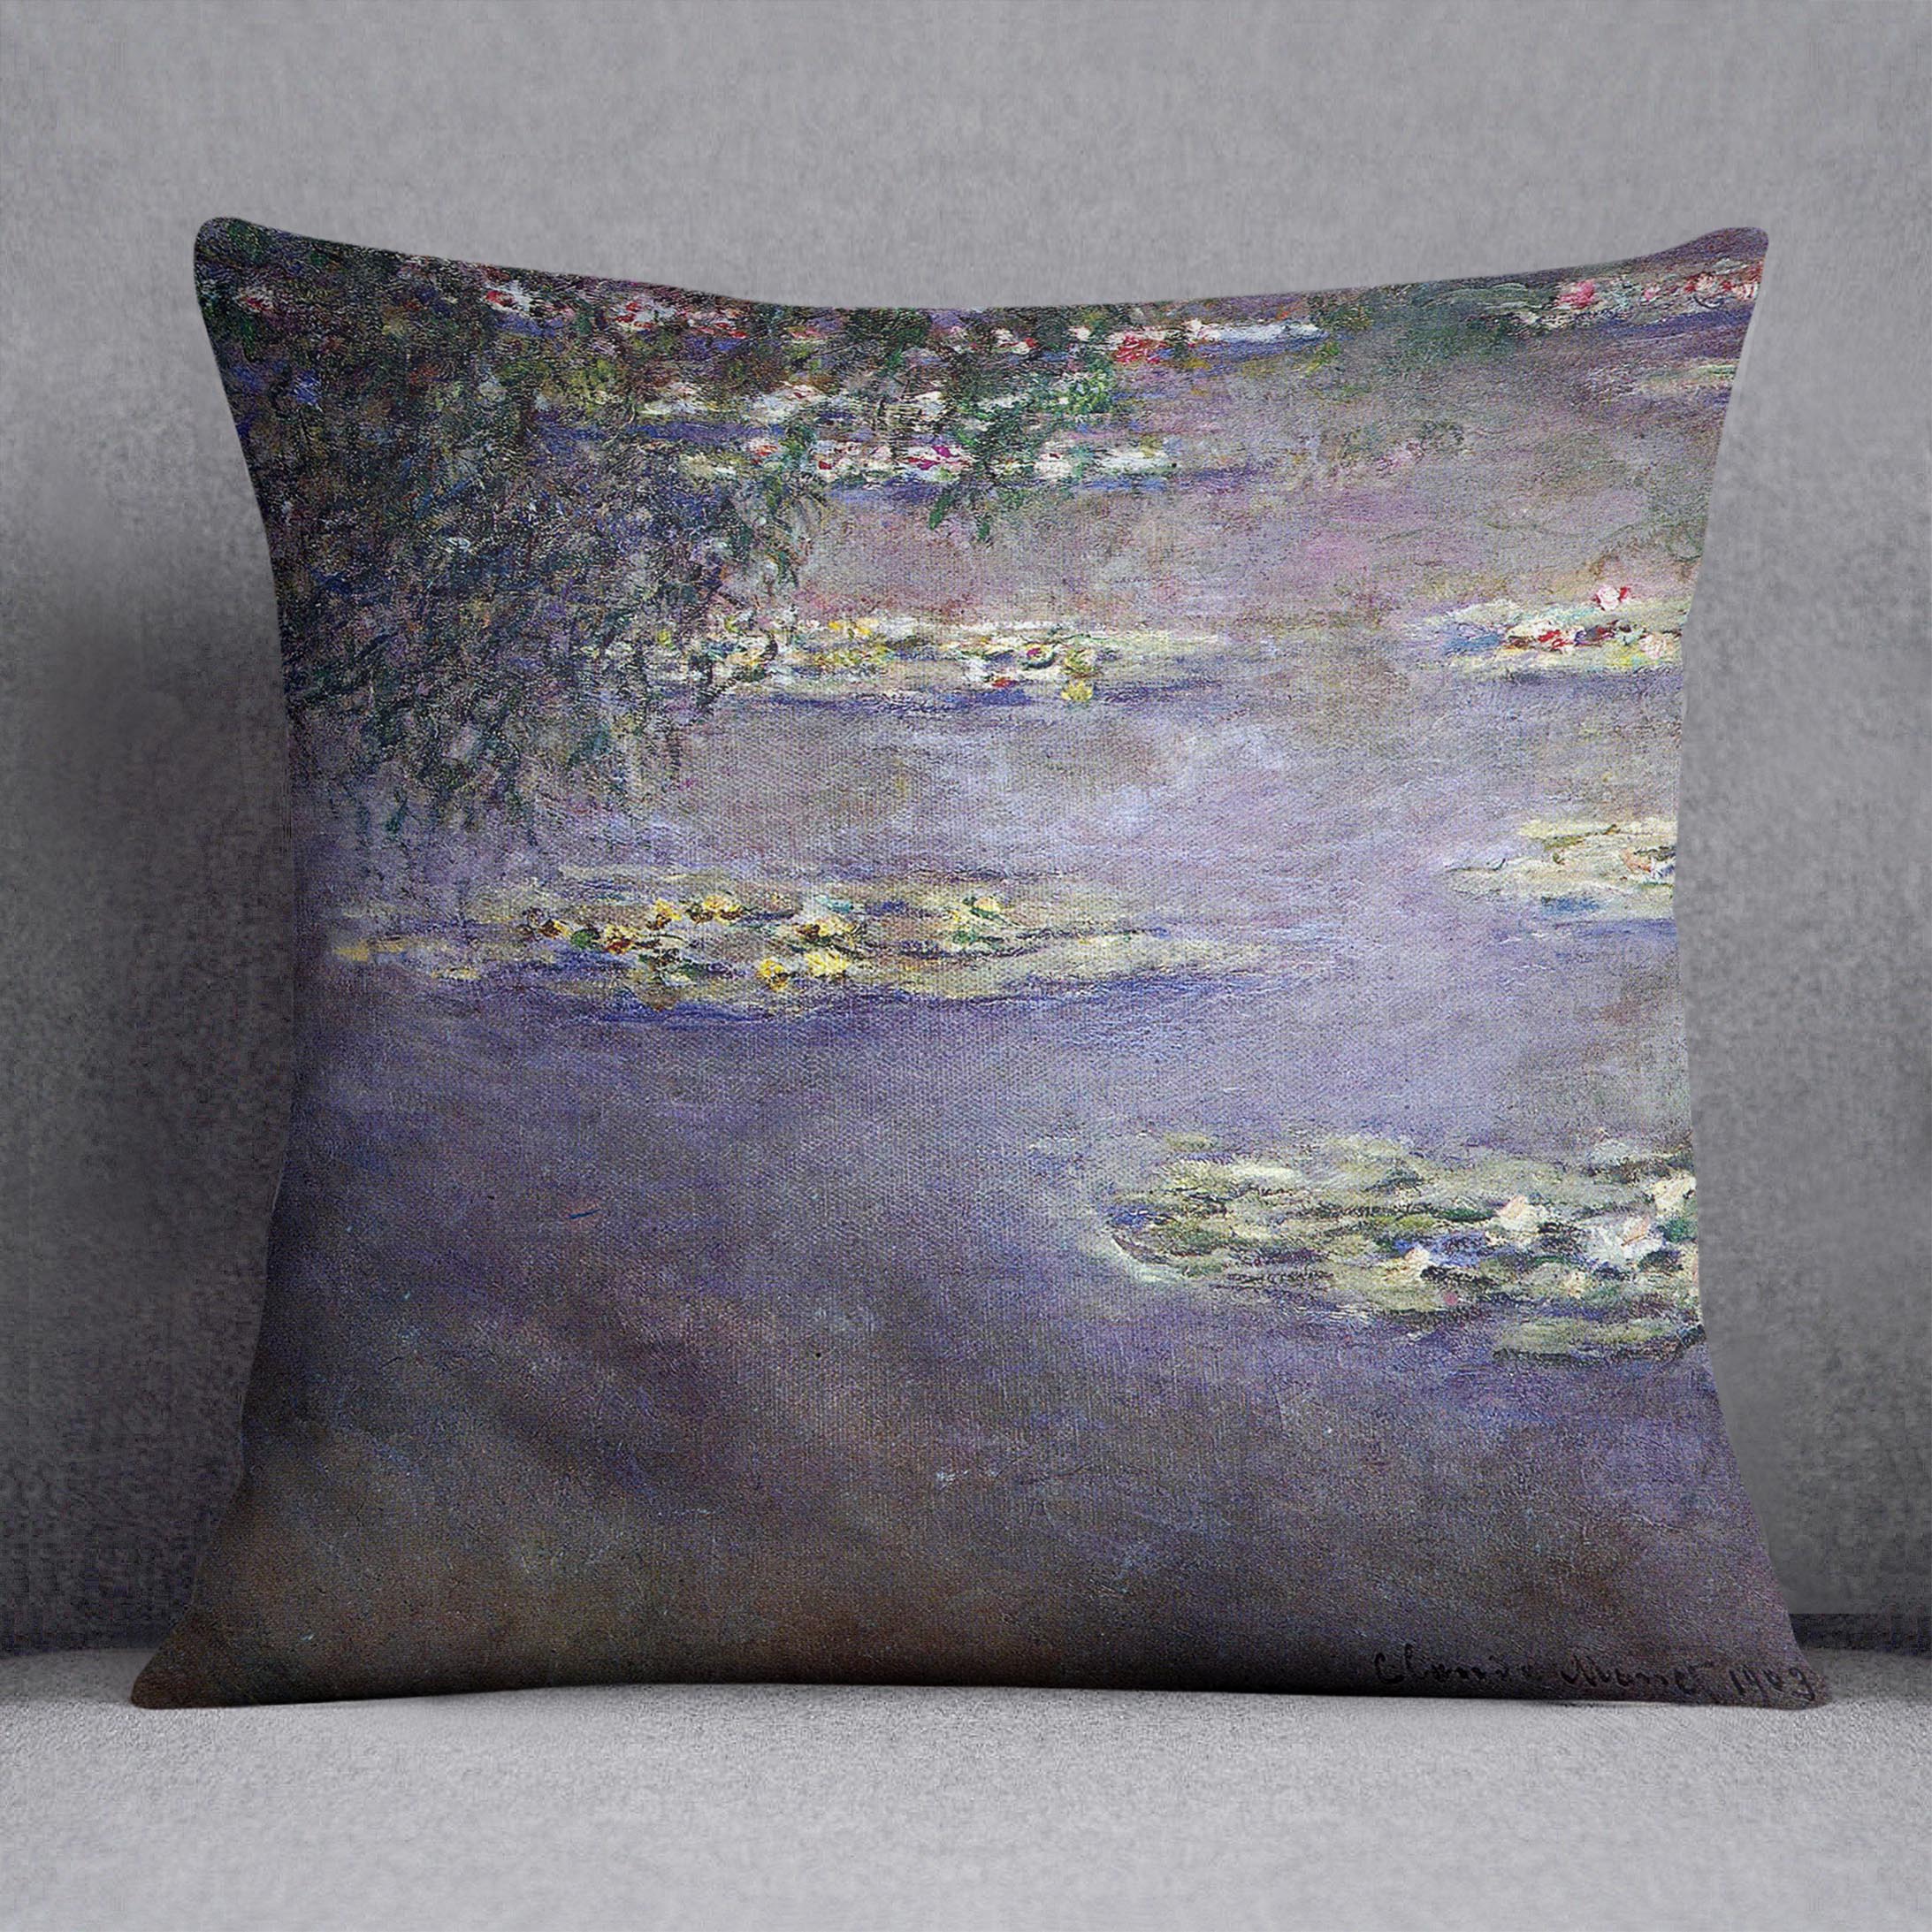 Water lilies water landscape 1 by Monet Cushion